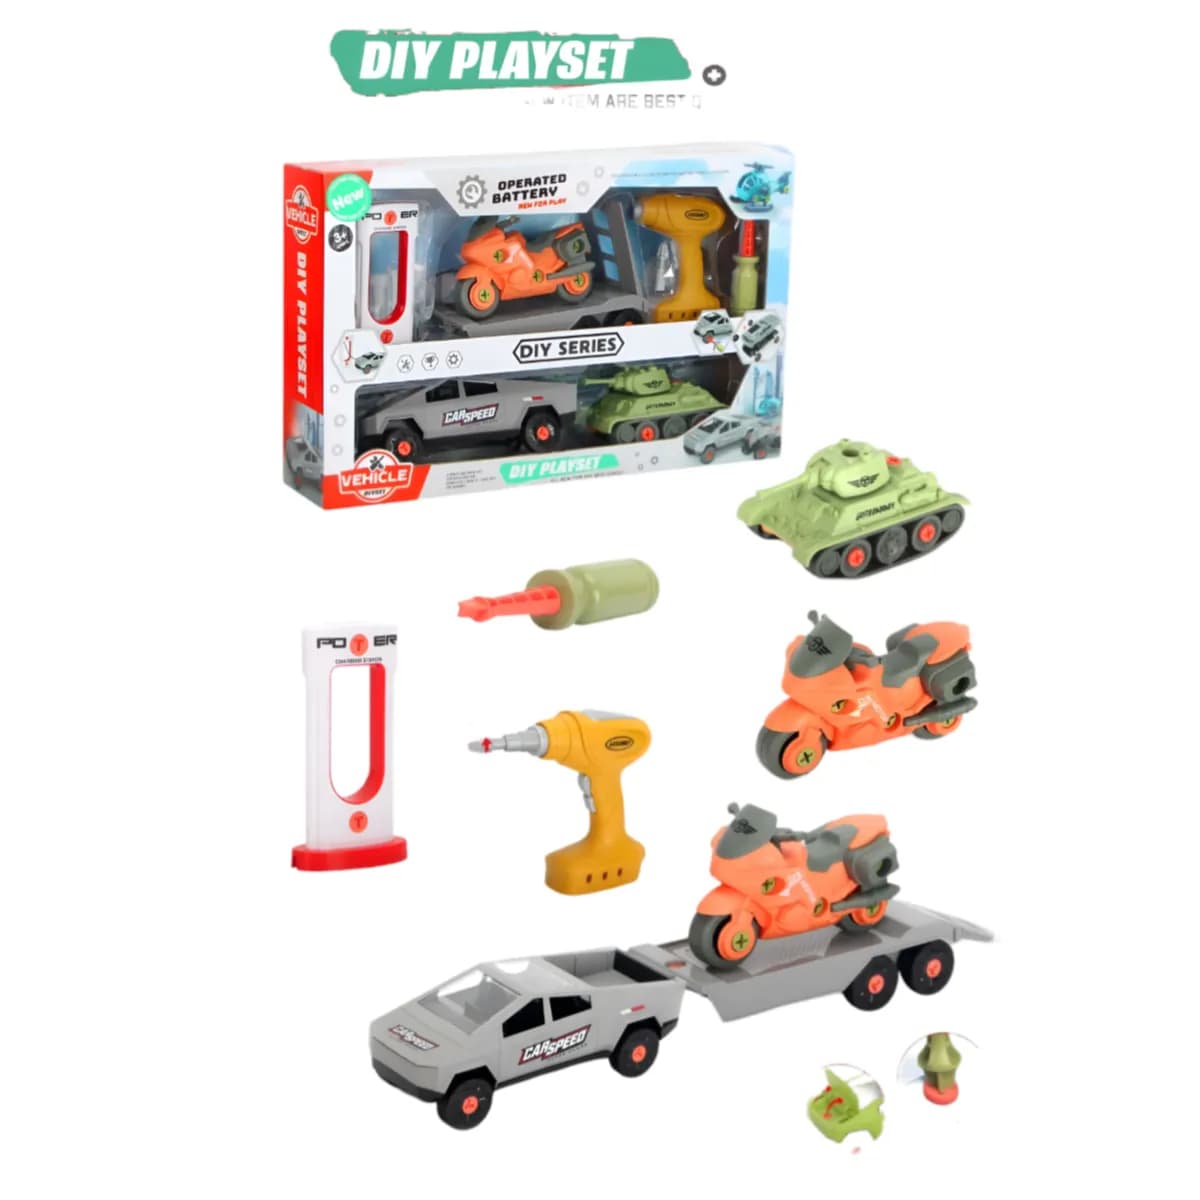 BATTERY OPERATED DIY VEHICLE PLAY SET FOR KIDS - BUILDING KIT - (PSQL45)